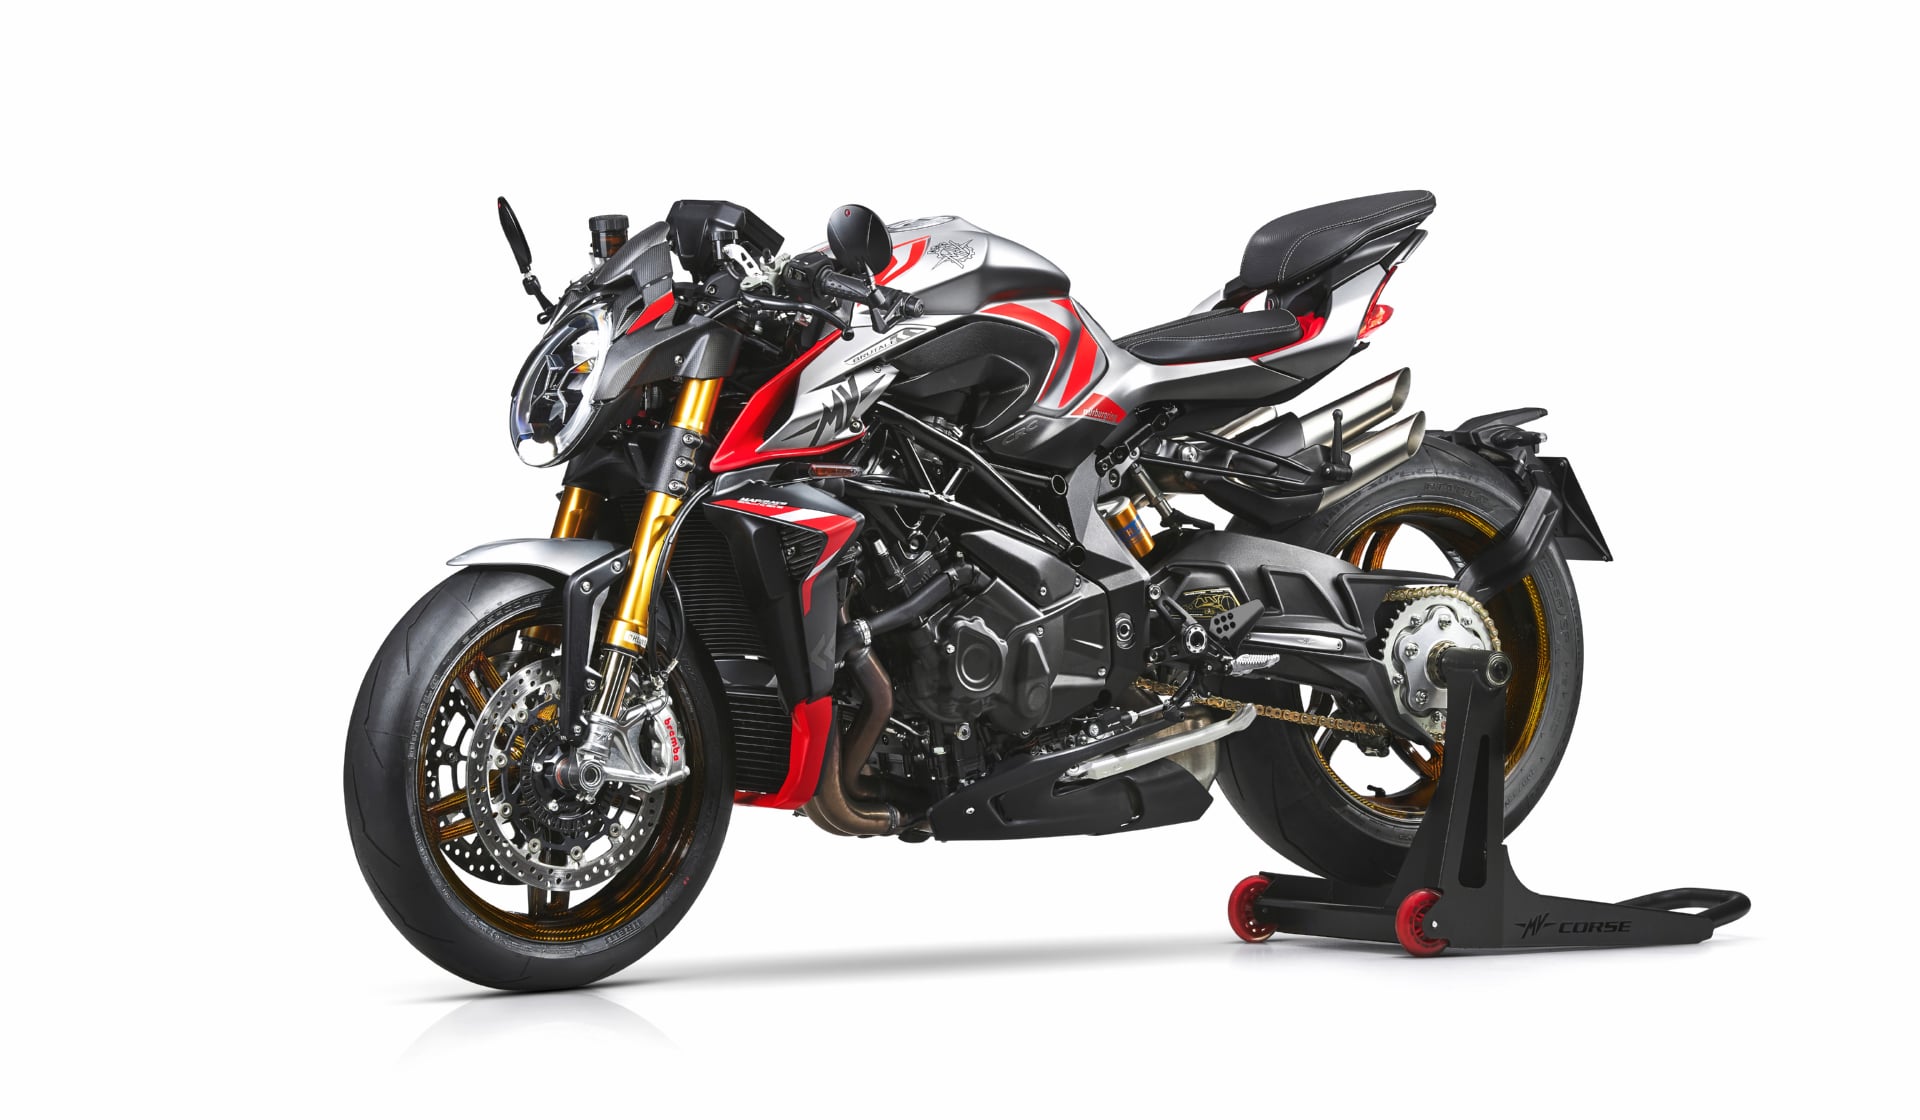 MV Agusta Brutale 1000 Nurburgring wallpapers HD quality